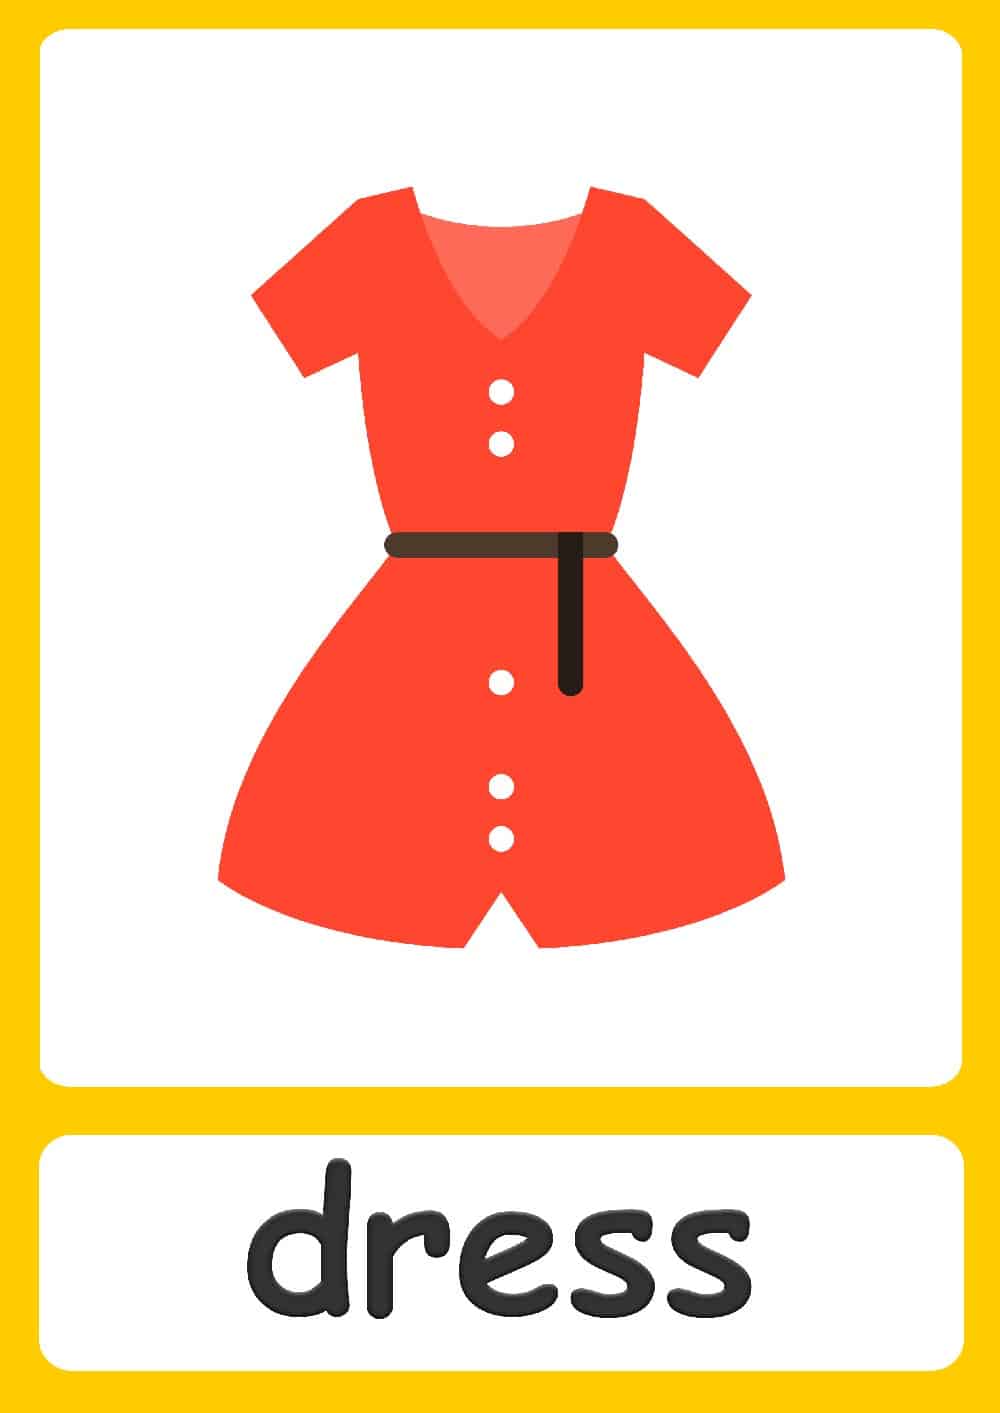 60 Clothing Flashcards For Kids 60 Items Of Clothing To Learn With